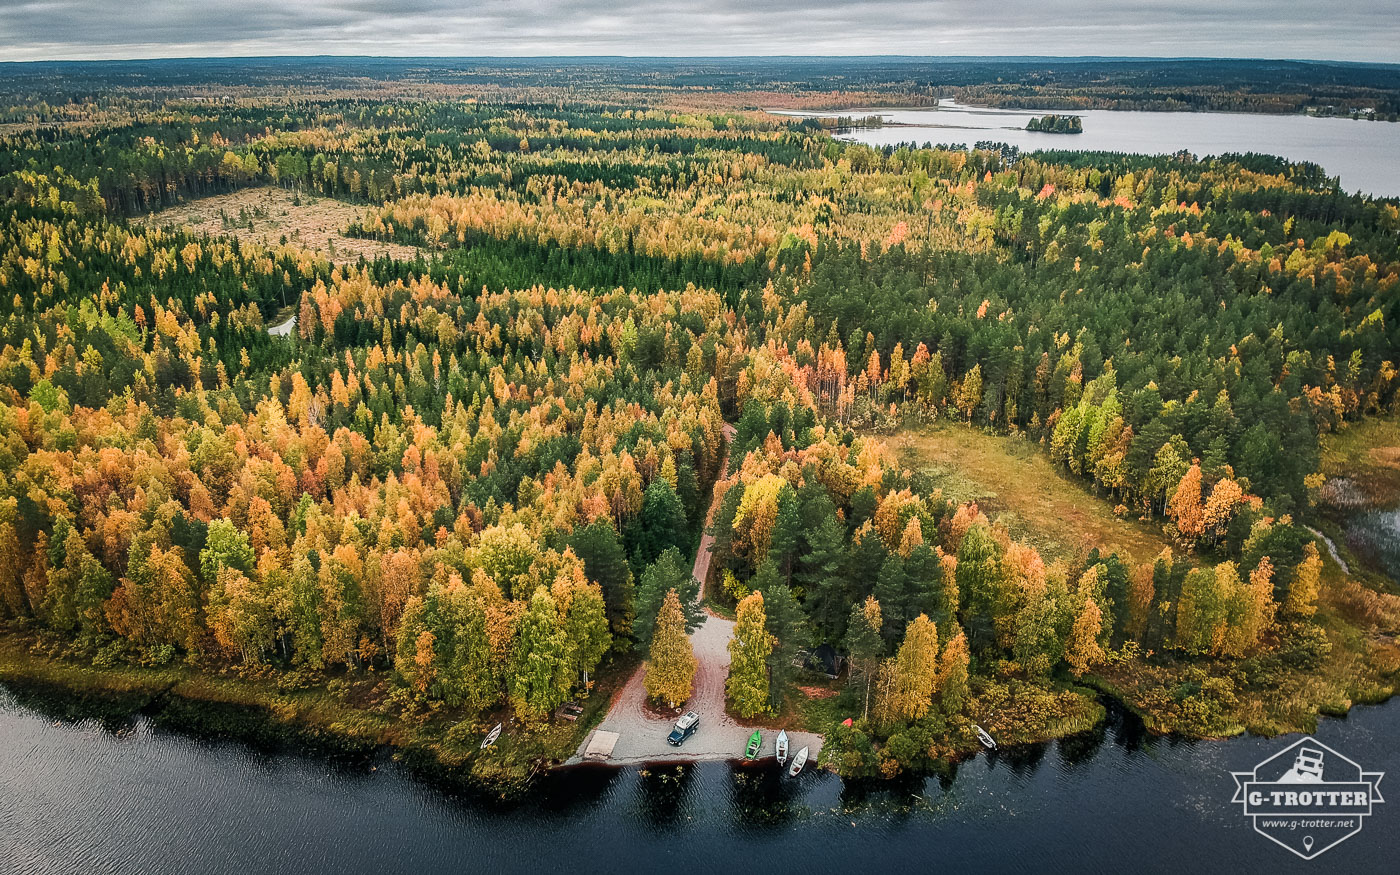 One of the most beautiful wild campspots we found in Finland.